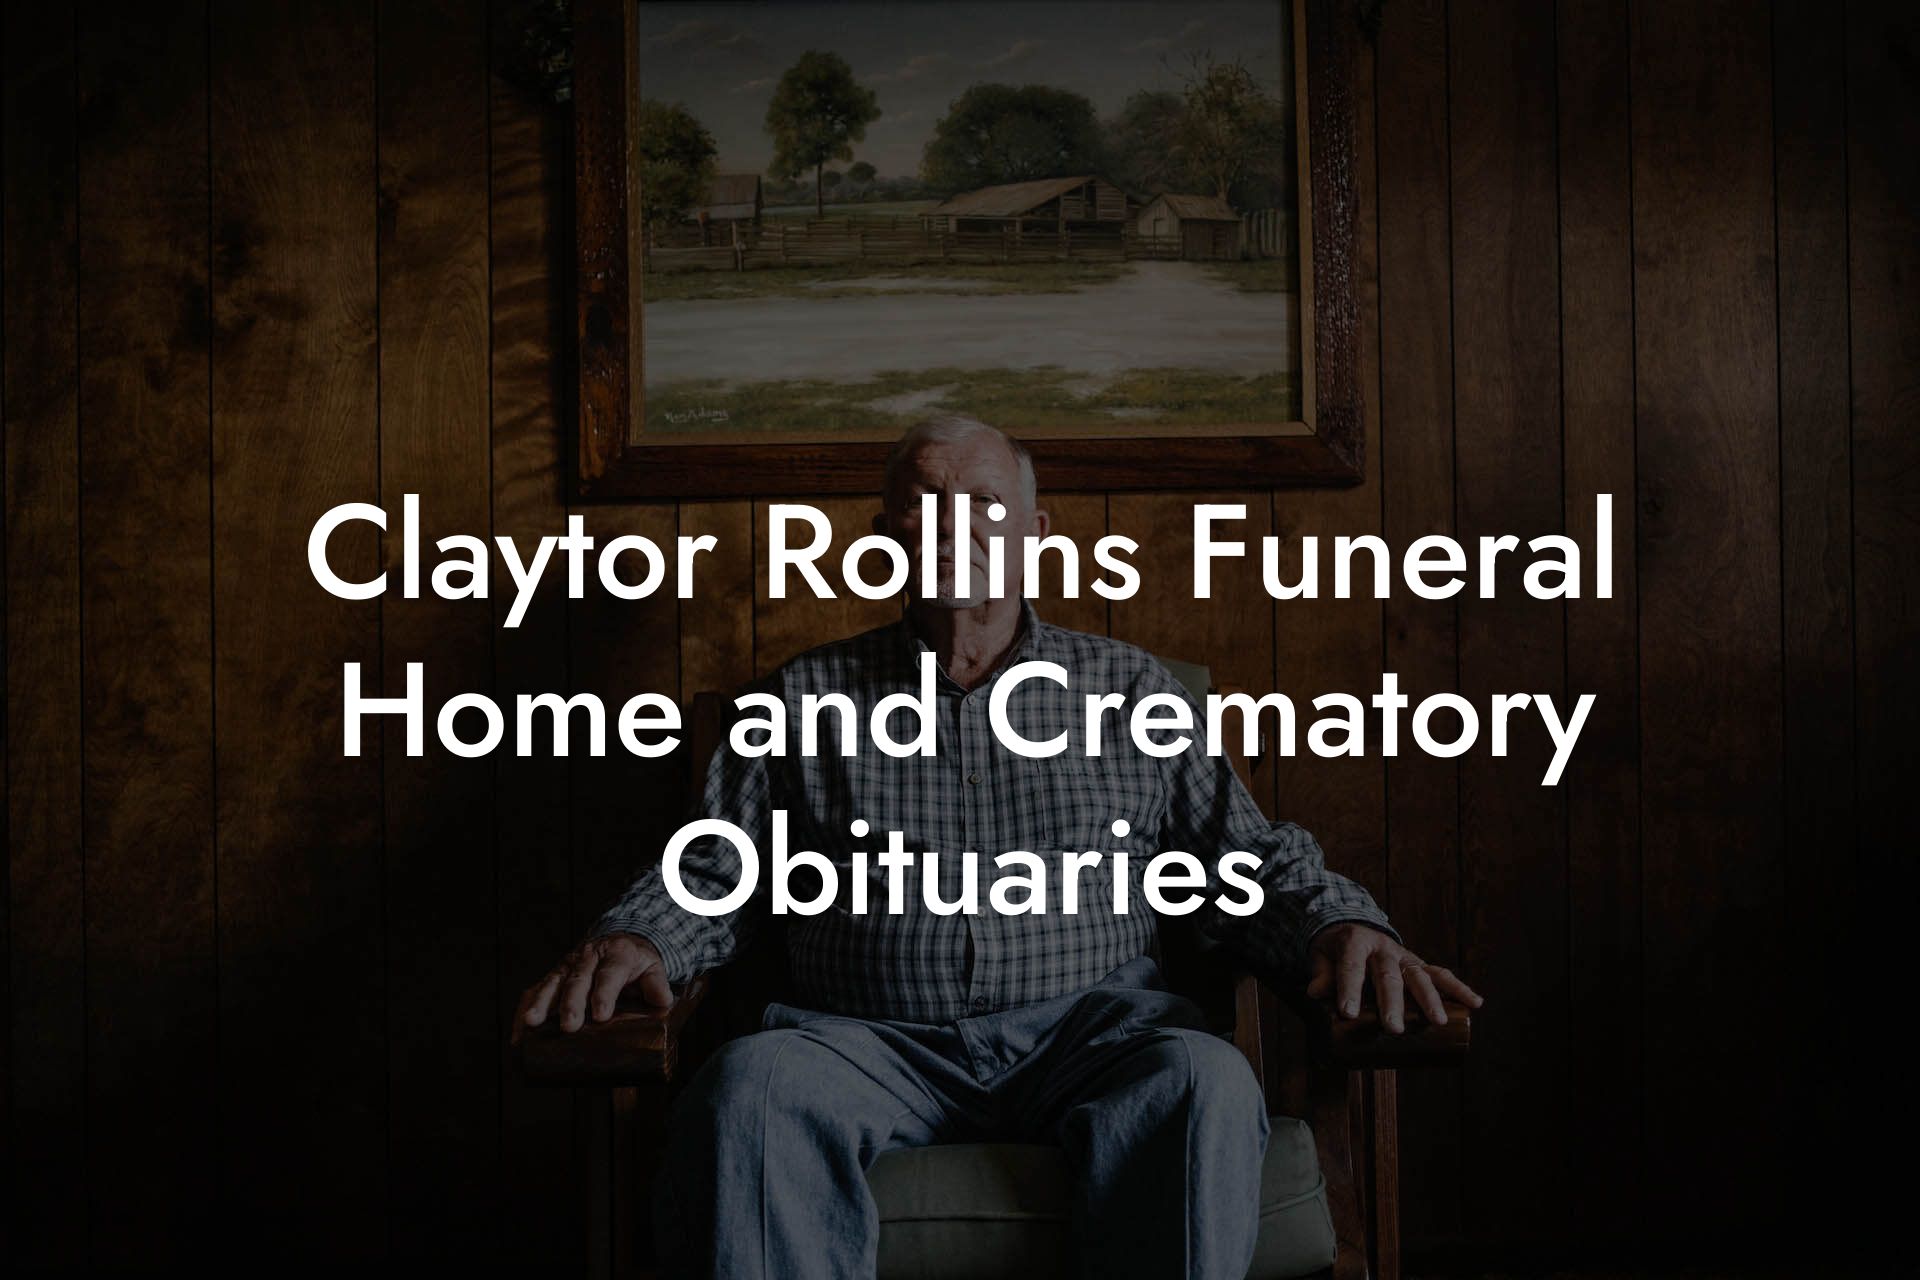 Claytor Rollins Funeral Home and Crematory Obituaries